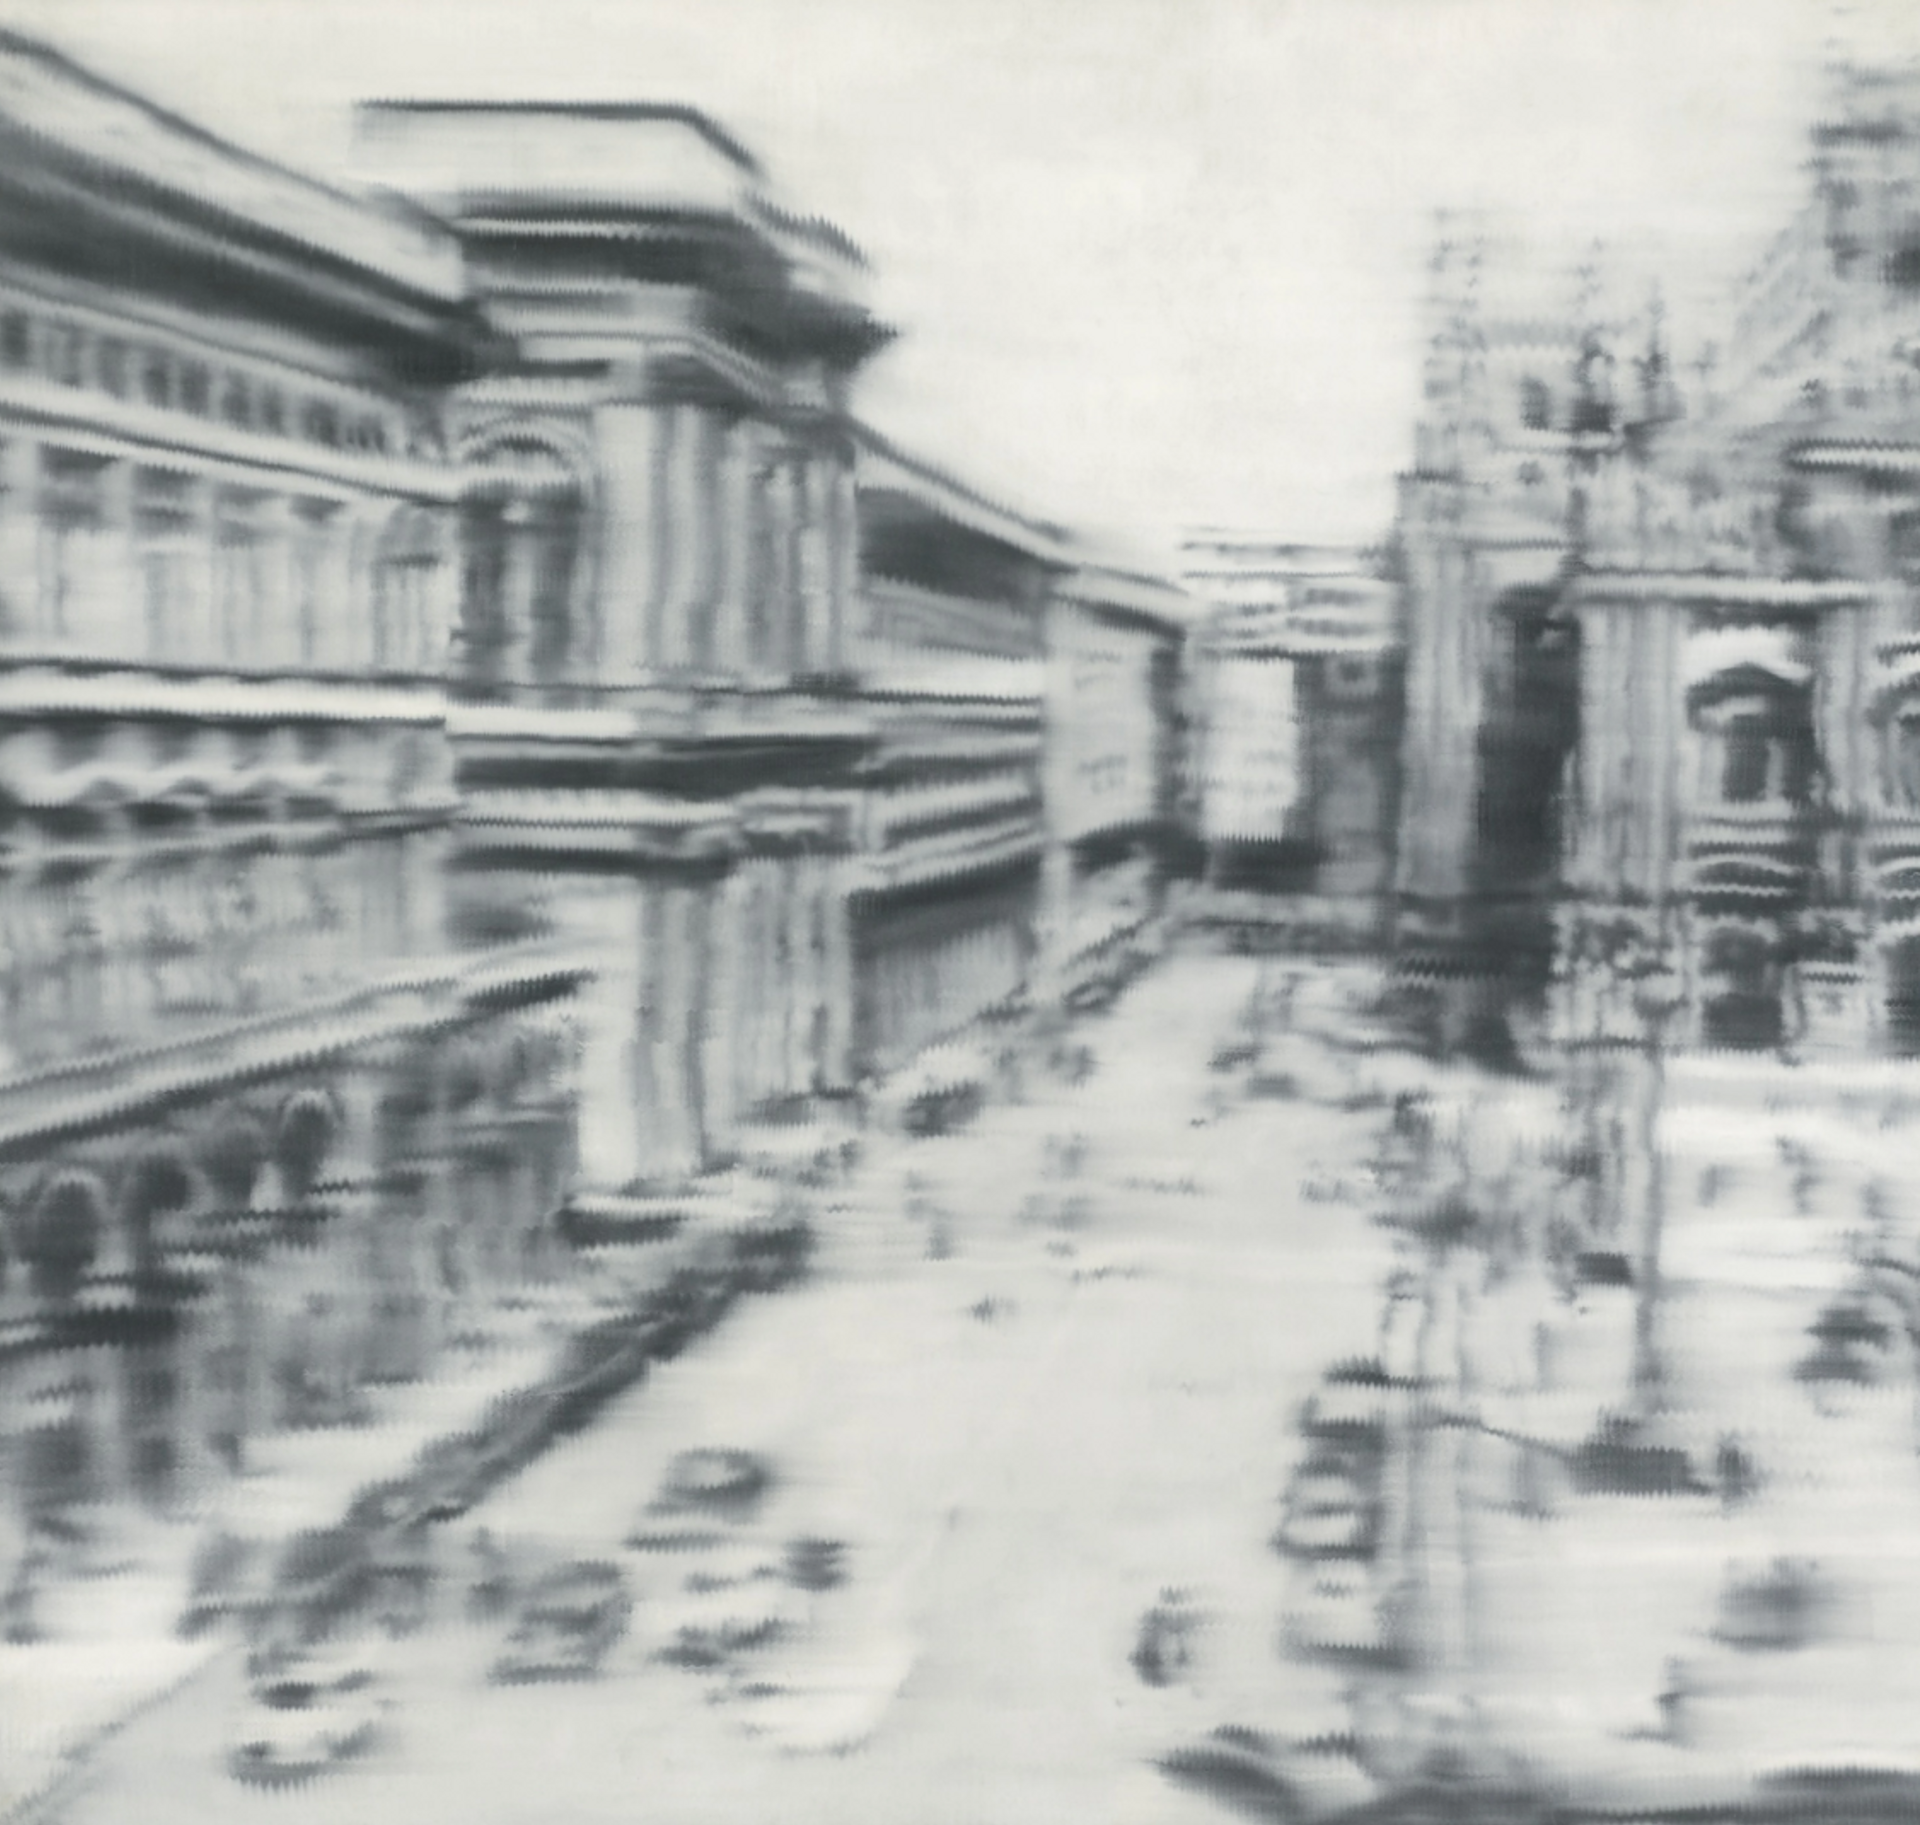 Photorealistic painting by Gerhard Richter, featuring a blurred black and white depiction of Milan's Cathedral Square between the Galleria Vittorio Emanuele and the Milan Cathedral.